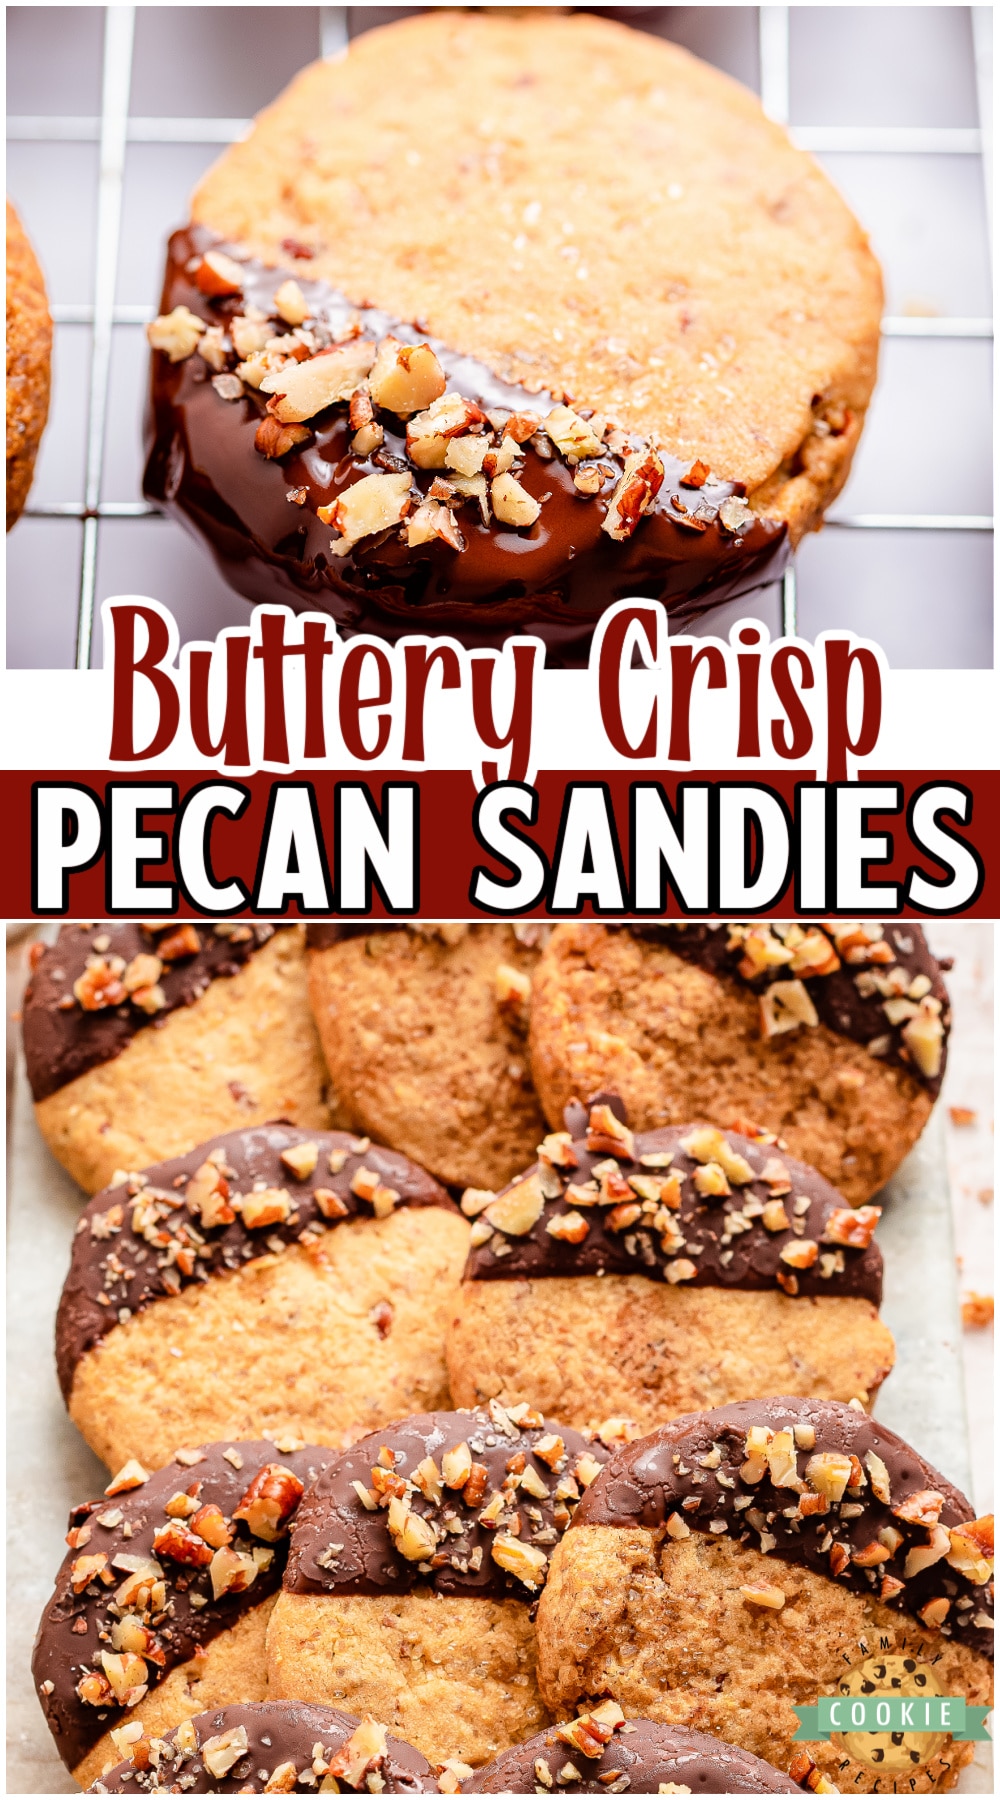 Pecan Sandies are a tender, buttery cookie flavored with cinnamon, vanilla and plenty of pecans! Pecan cookies dipped in dark chocolate and sprinkled with chopped pecans for the ultimate cookie!  via @buttergirls